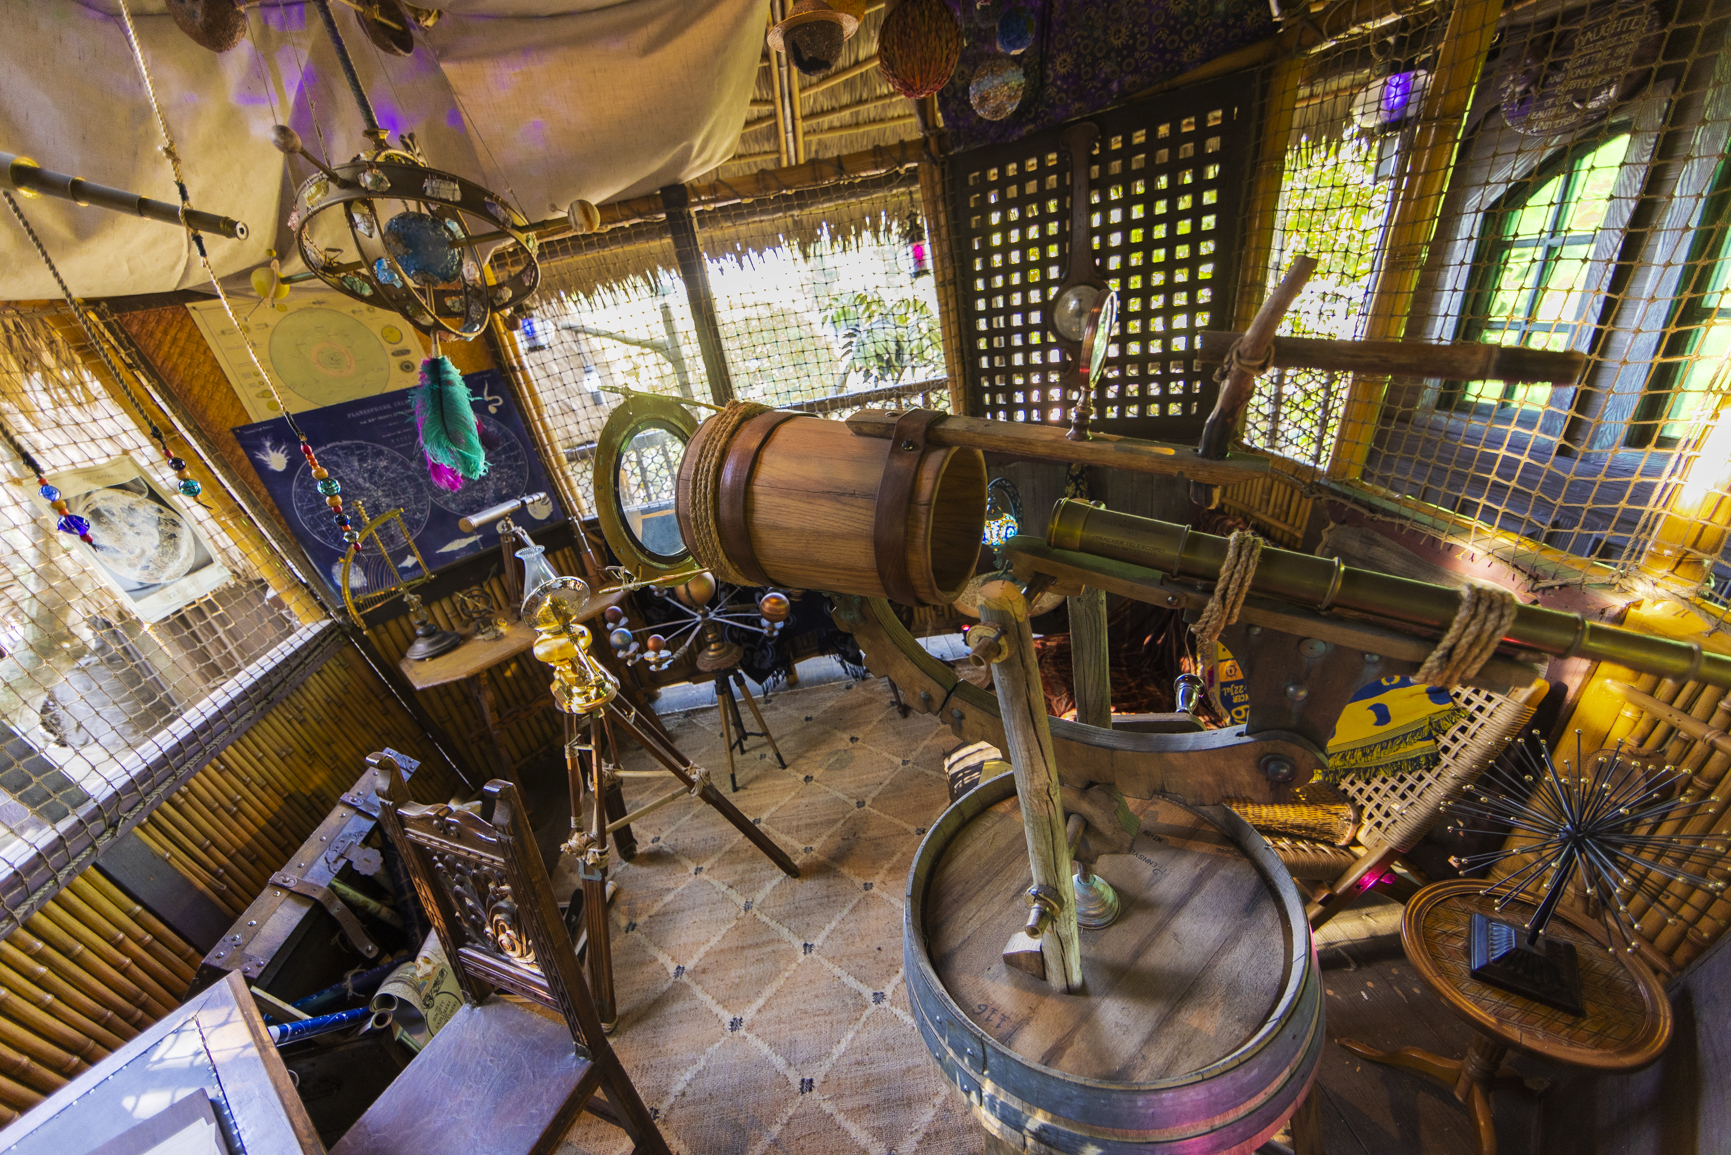 Paying tribute to the original treehouse that Walt Disney and his Imagineers built in 1962 for the movie “Swiss Family Robinson,” the Adventureland Treehouse inspired by Walt Disney’s Swiss Family Robinson will open in a fresh, new way Nov. 10, 2023, at Disneyland Park in Anaheim, Calif. The daughter’s astronomer’s loft reflects her affinity for tracking stars, planets and comets with her many telescopes. (Christian Thompson/Disneyland Resort)